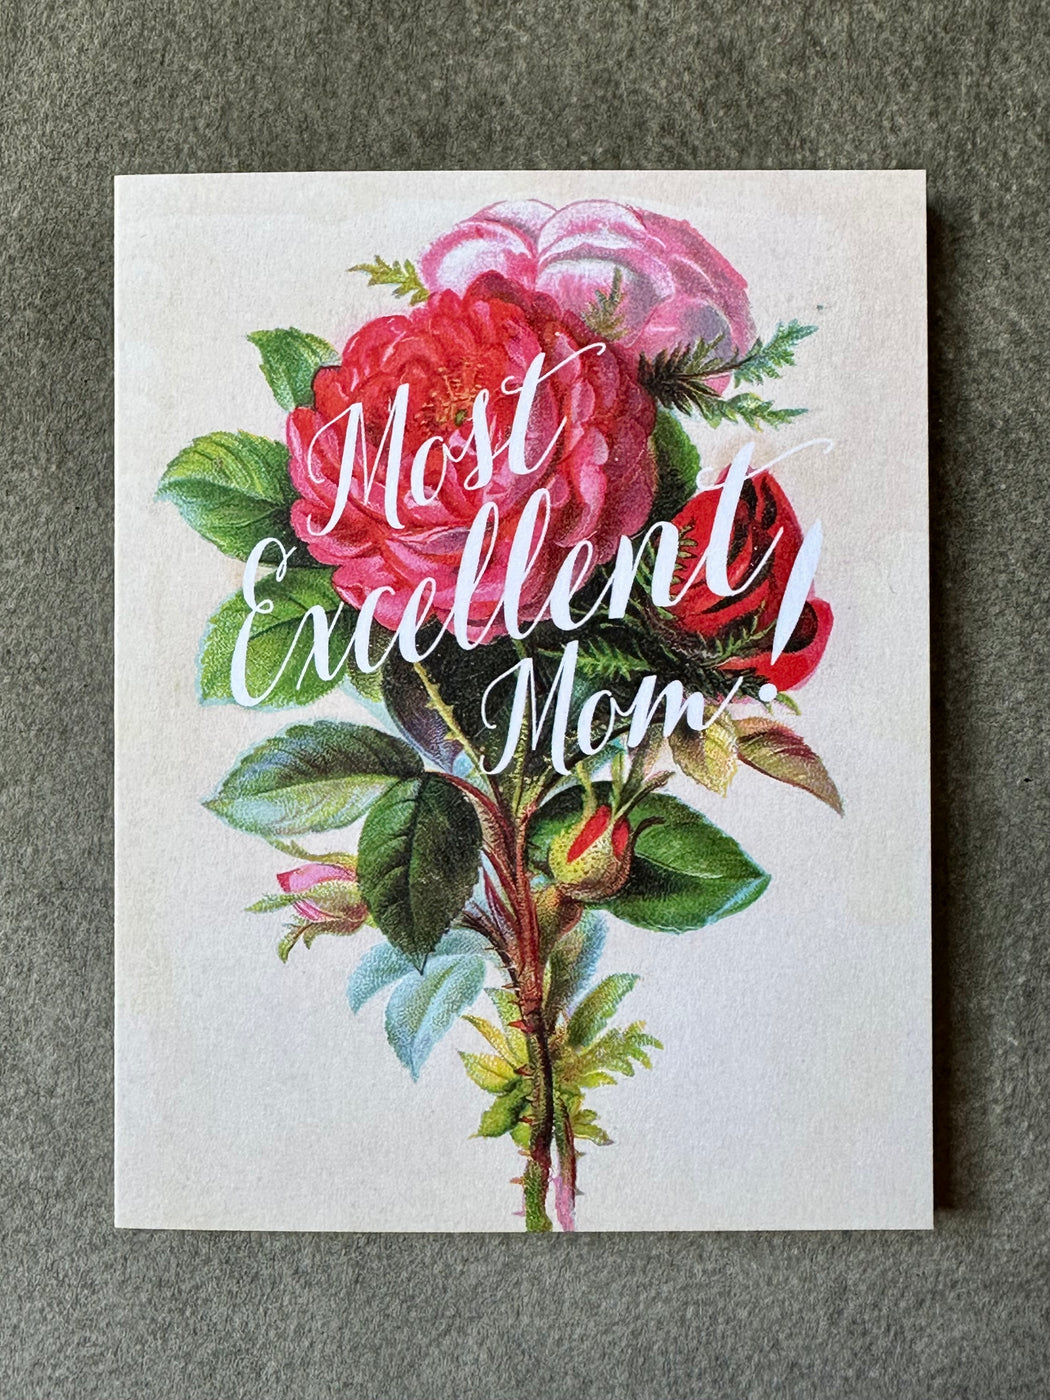 "Most Excellent Mom" Card